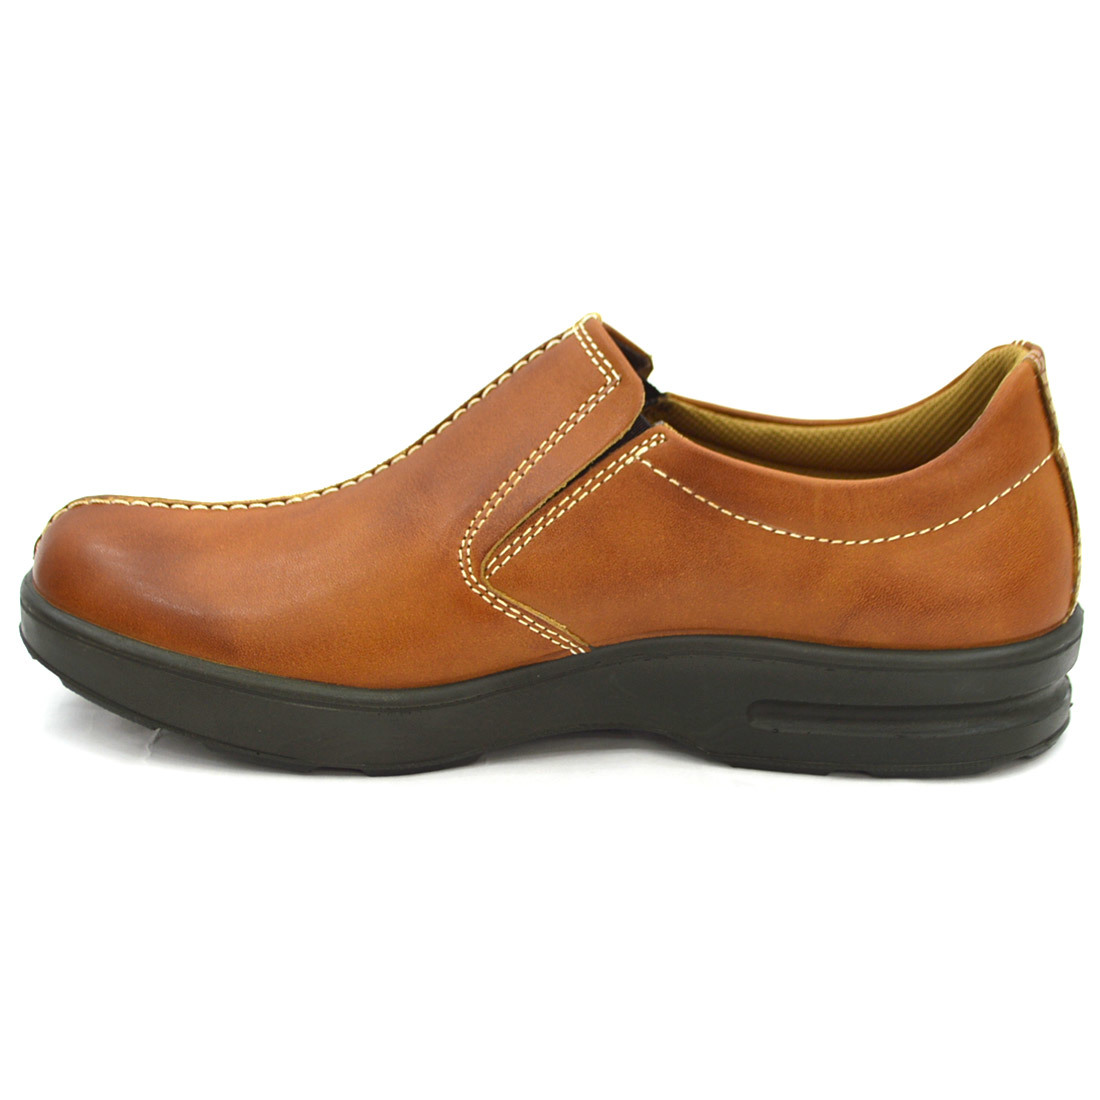 ^BOBSON Bobson casual shoes walking slip-on shoes 4509 original leather made in Japan Brown Brown tea 25.0cm (0910010564-br-s250)